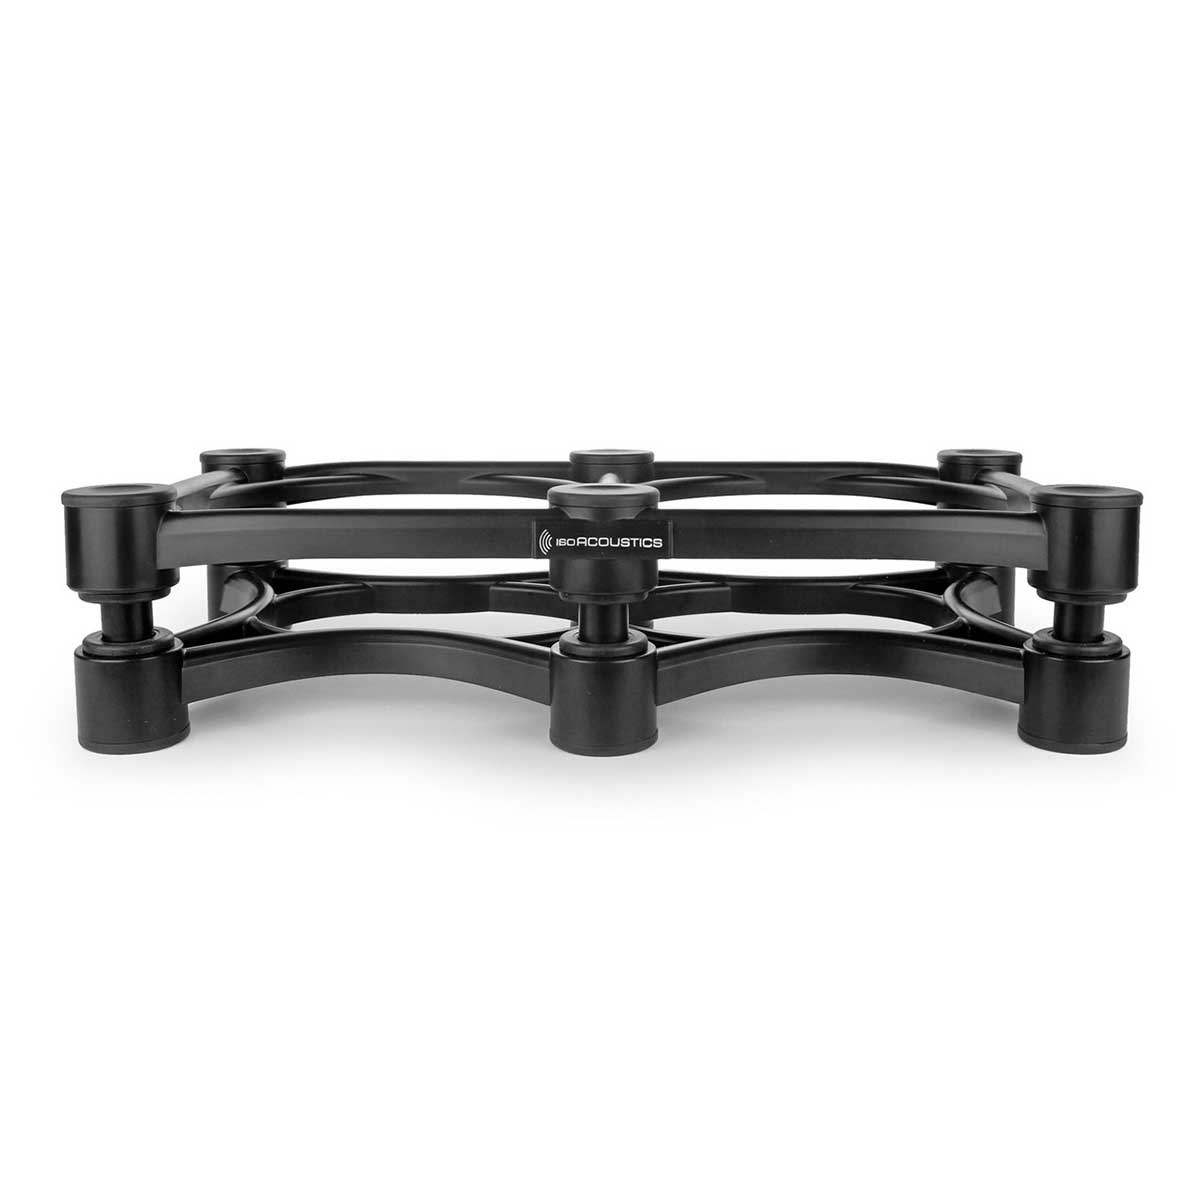 isoACOUSTICS ISO-430 Adjustable Isolation Stand For Studio Monitors, Guitar, Bass and Other Instrument Amplifiers